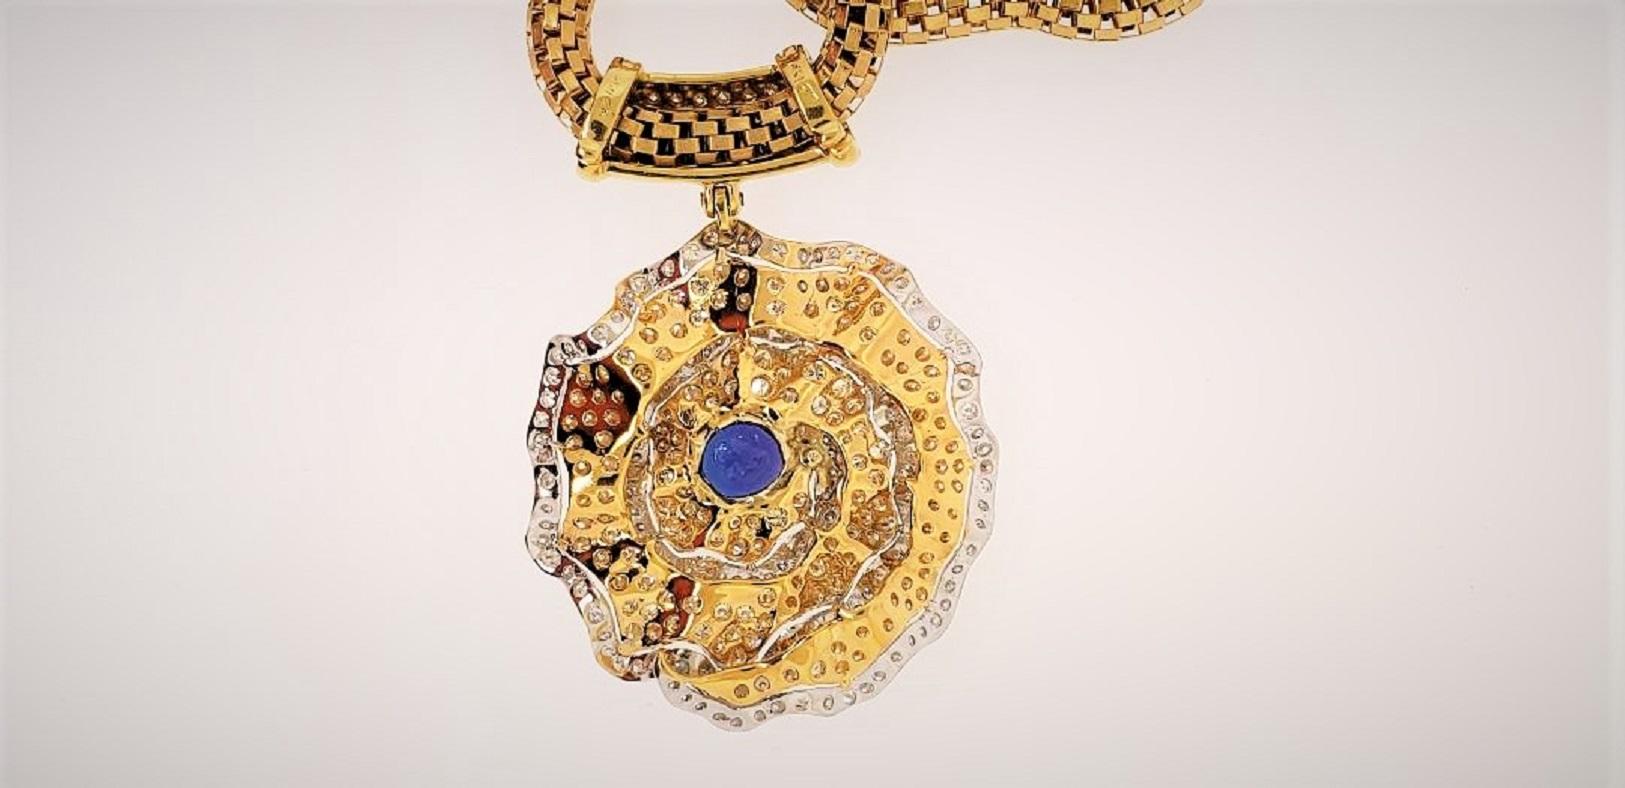 Re-designed by Michael Engelhardt,  this necklace hosts a beautiful blue Tanzanite weighing 8.79 carats.  The surrounding mounting is set with yellow diamonds and the outer parts of the petals with white diamonds.  The pendant contains 231 diamonds